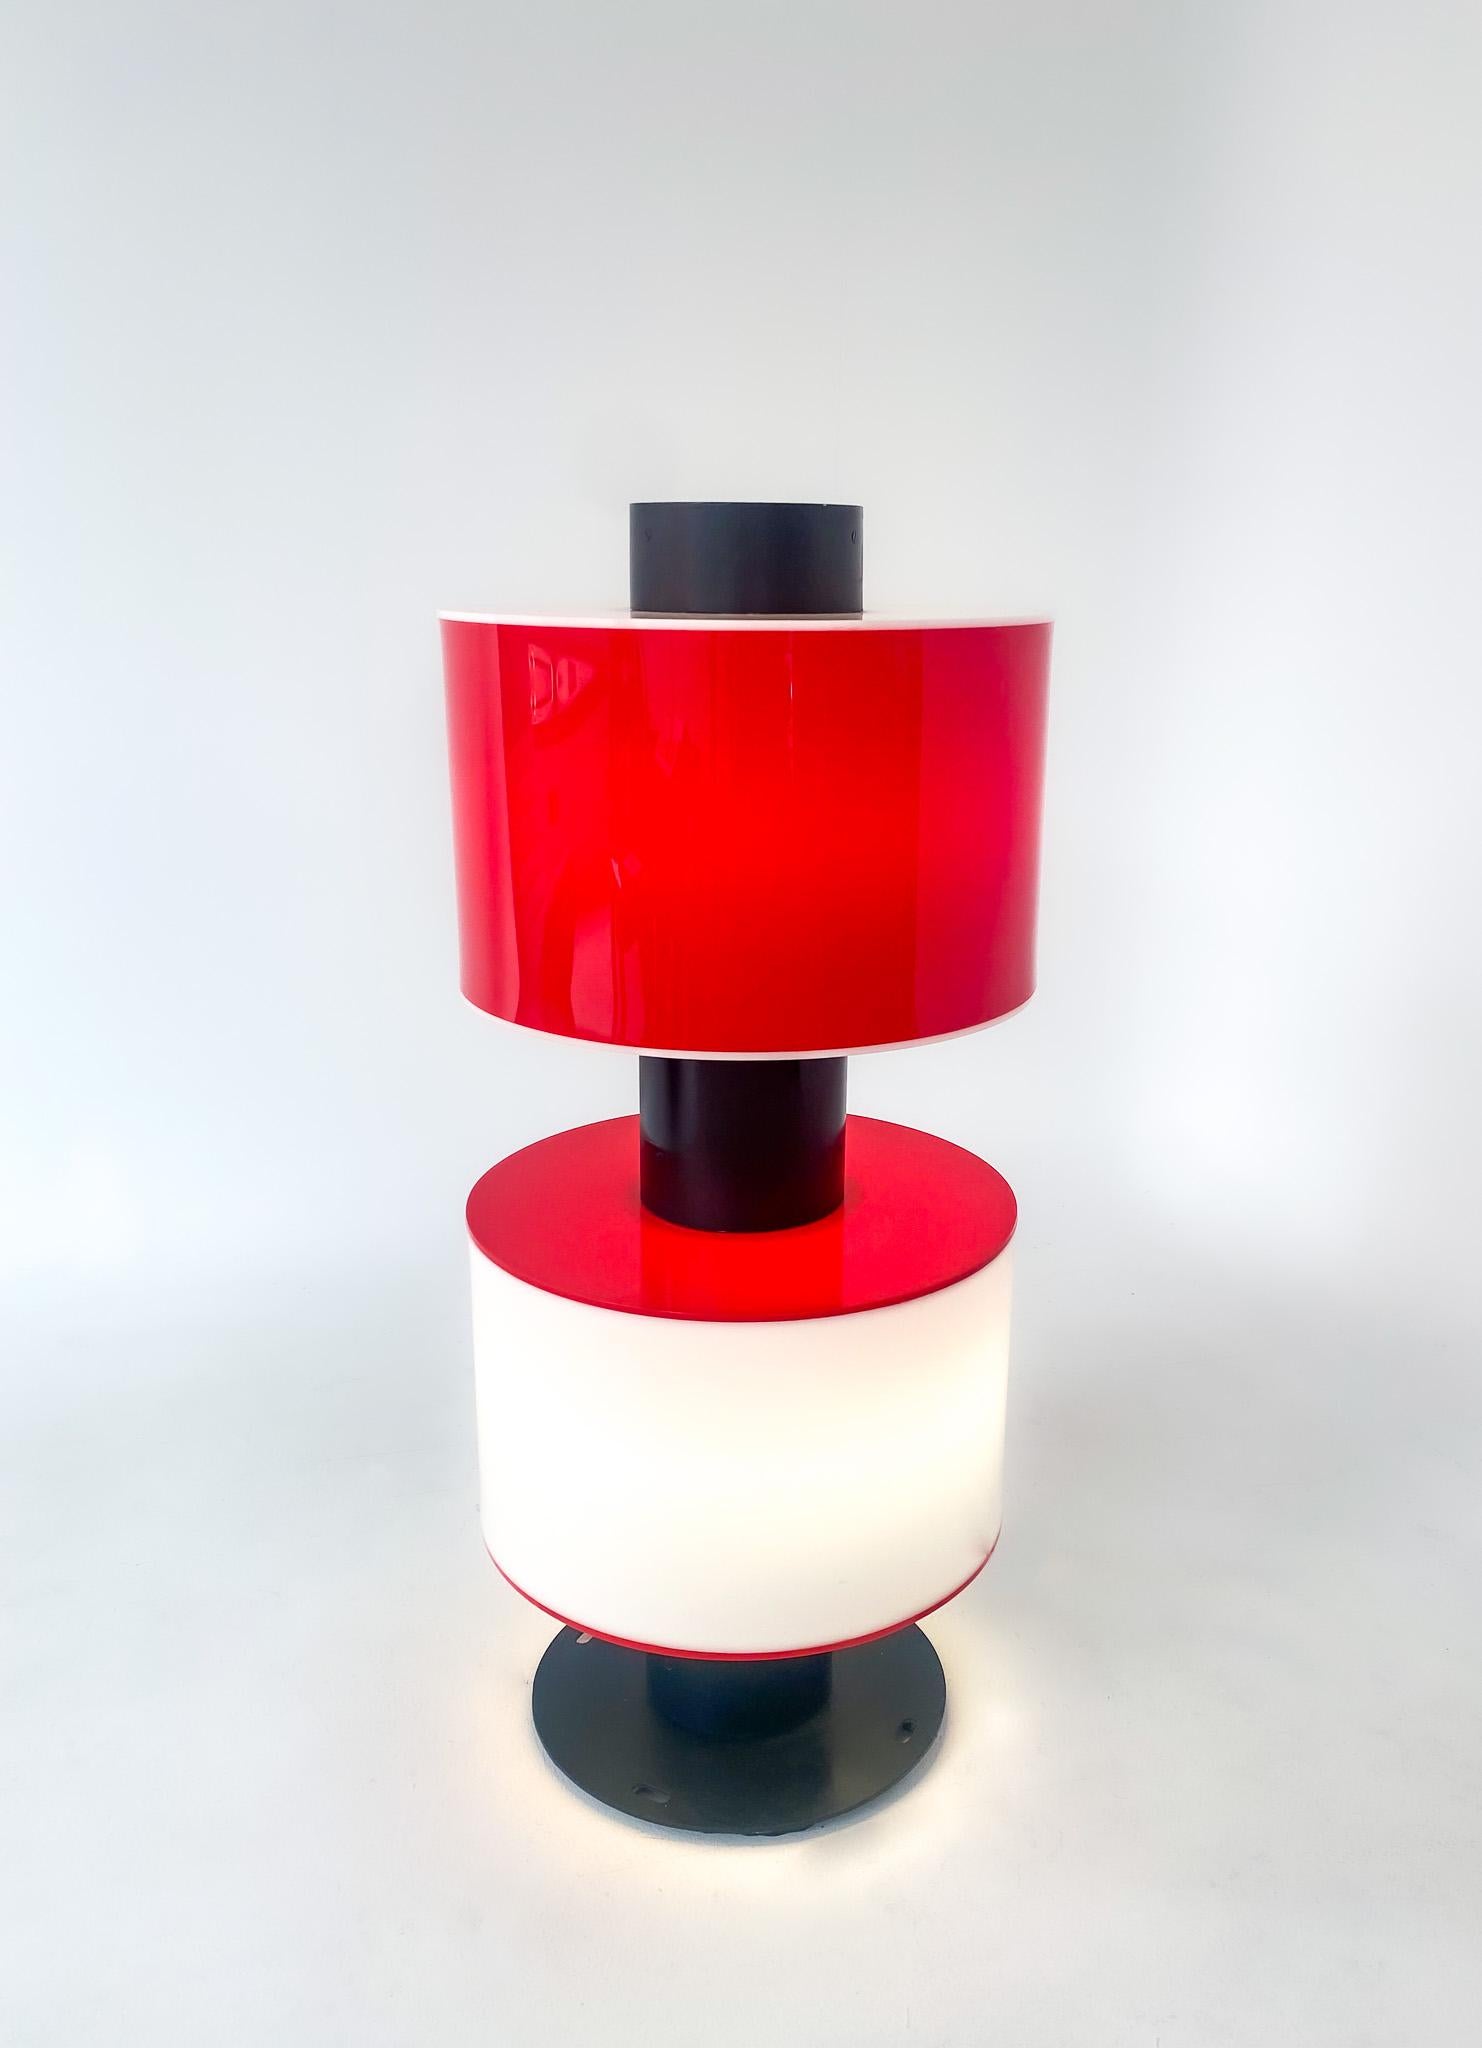 Mid-Century Modern Industrial Style Red White Floor Lamp by Texaco, US 1970’s.

This pendant/floor lamp from the Texaco company, dating back to the 1970s, exudes a vintage industrial charm that is sure to make a statement in any room. Crafted in